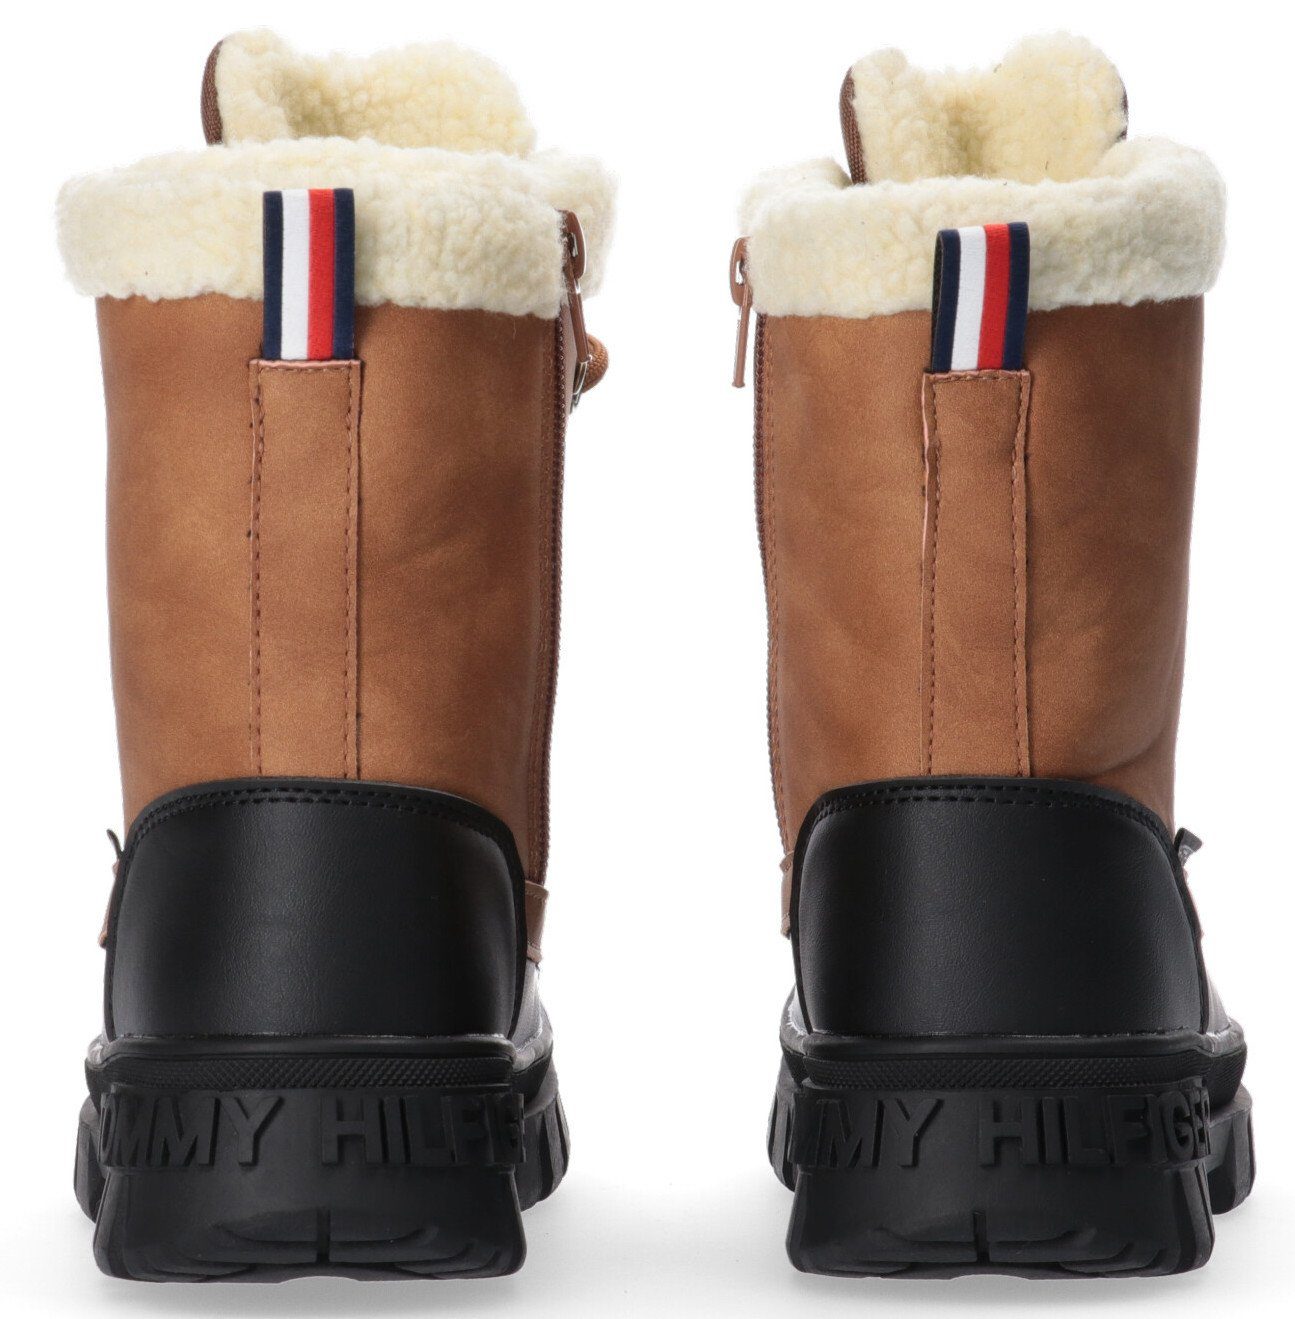 Thermostiefel LACE-UP BOOT Tommy Snowboots mit Warmfutter Hilfiger